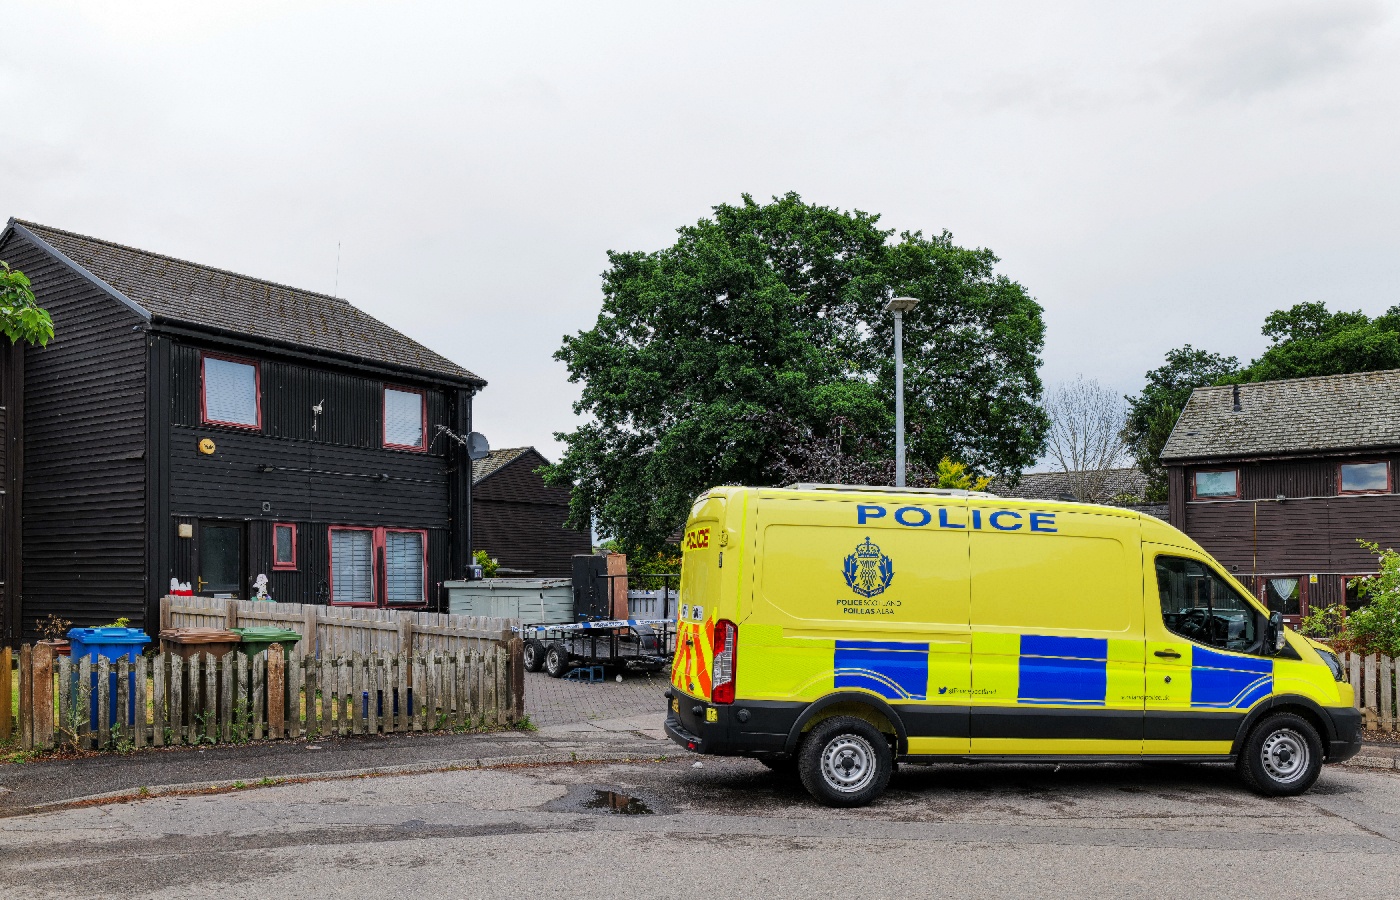 Police received a report of a disturbance in Milnafua, Alness, at around 12.30am on Saturday.